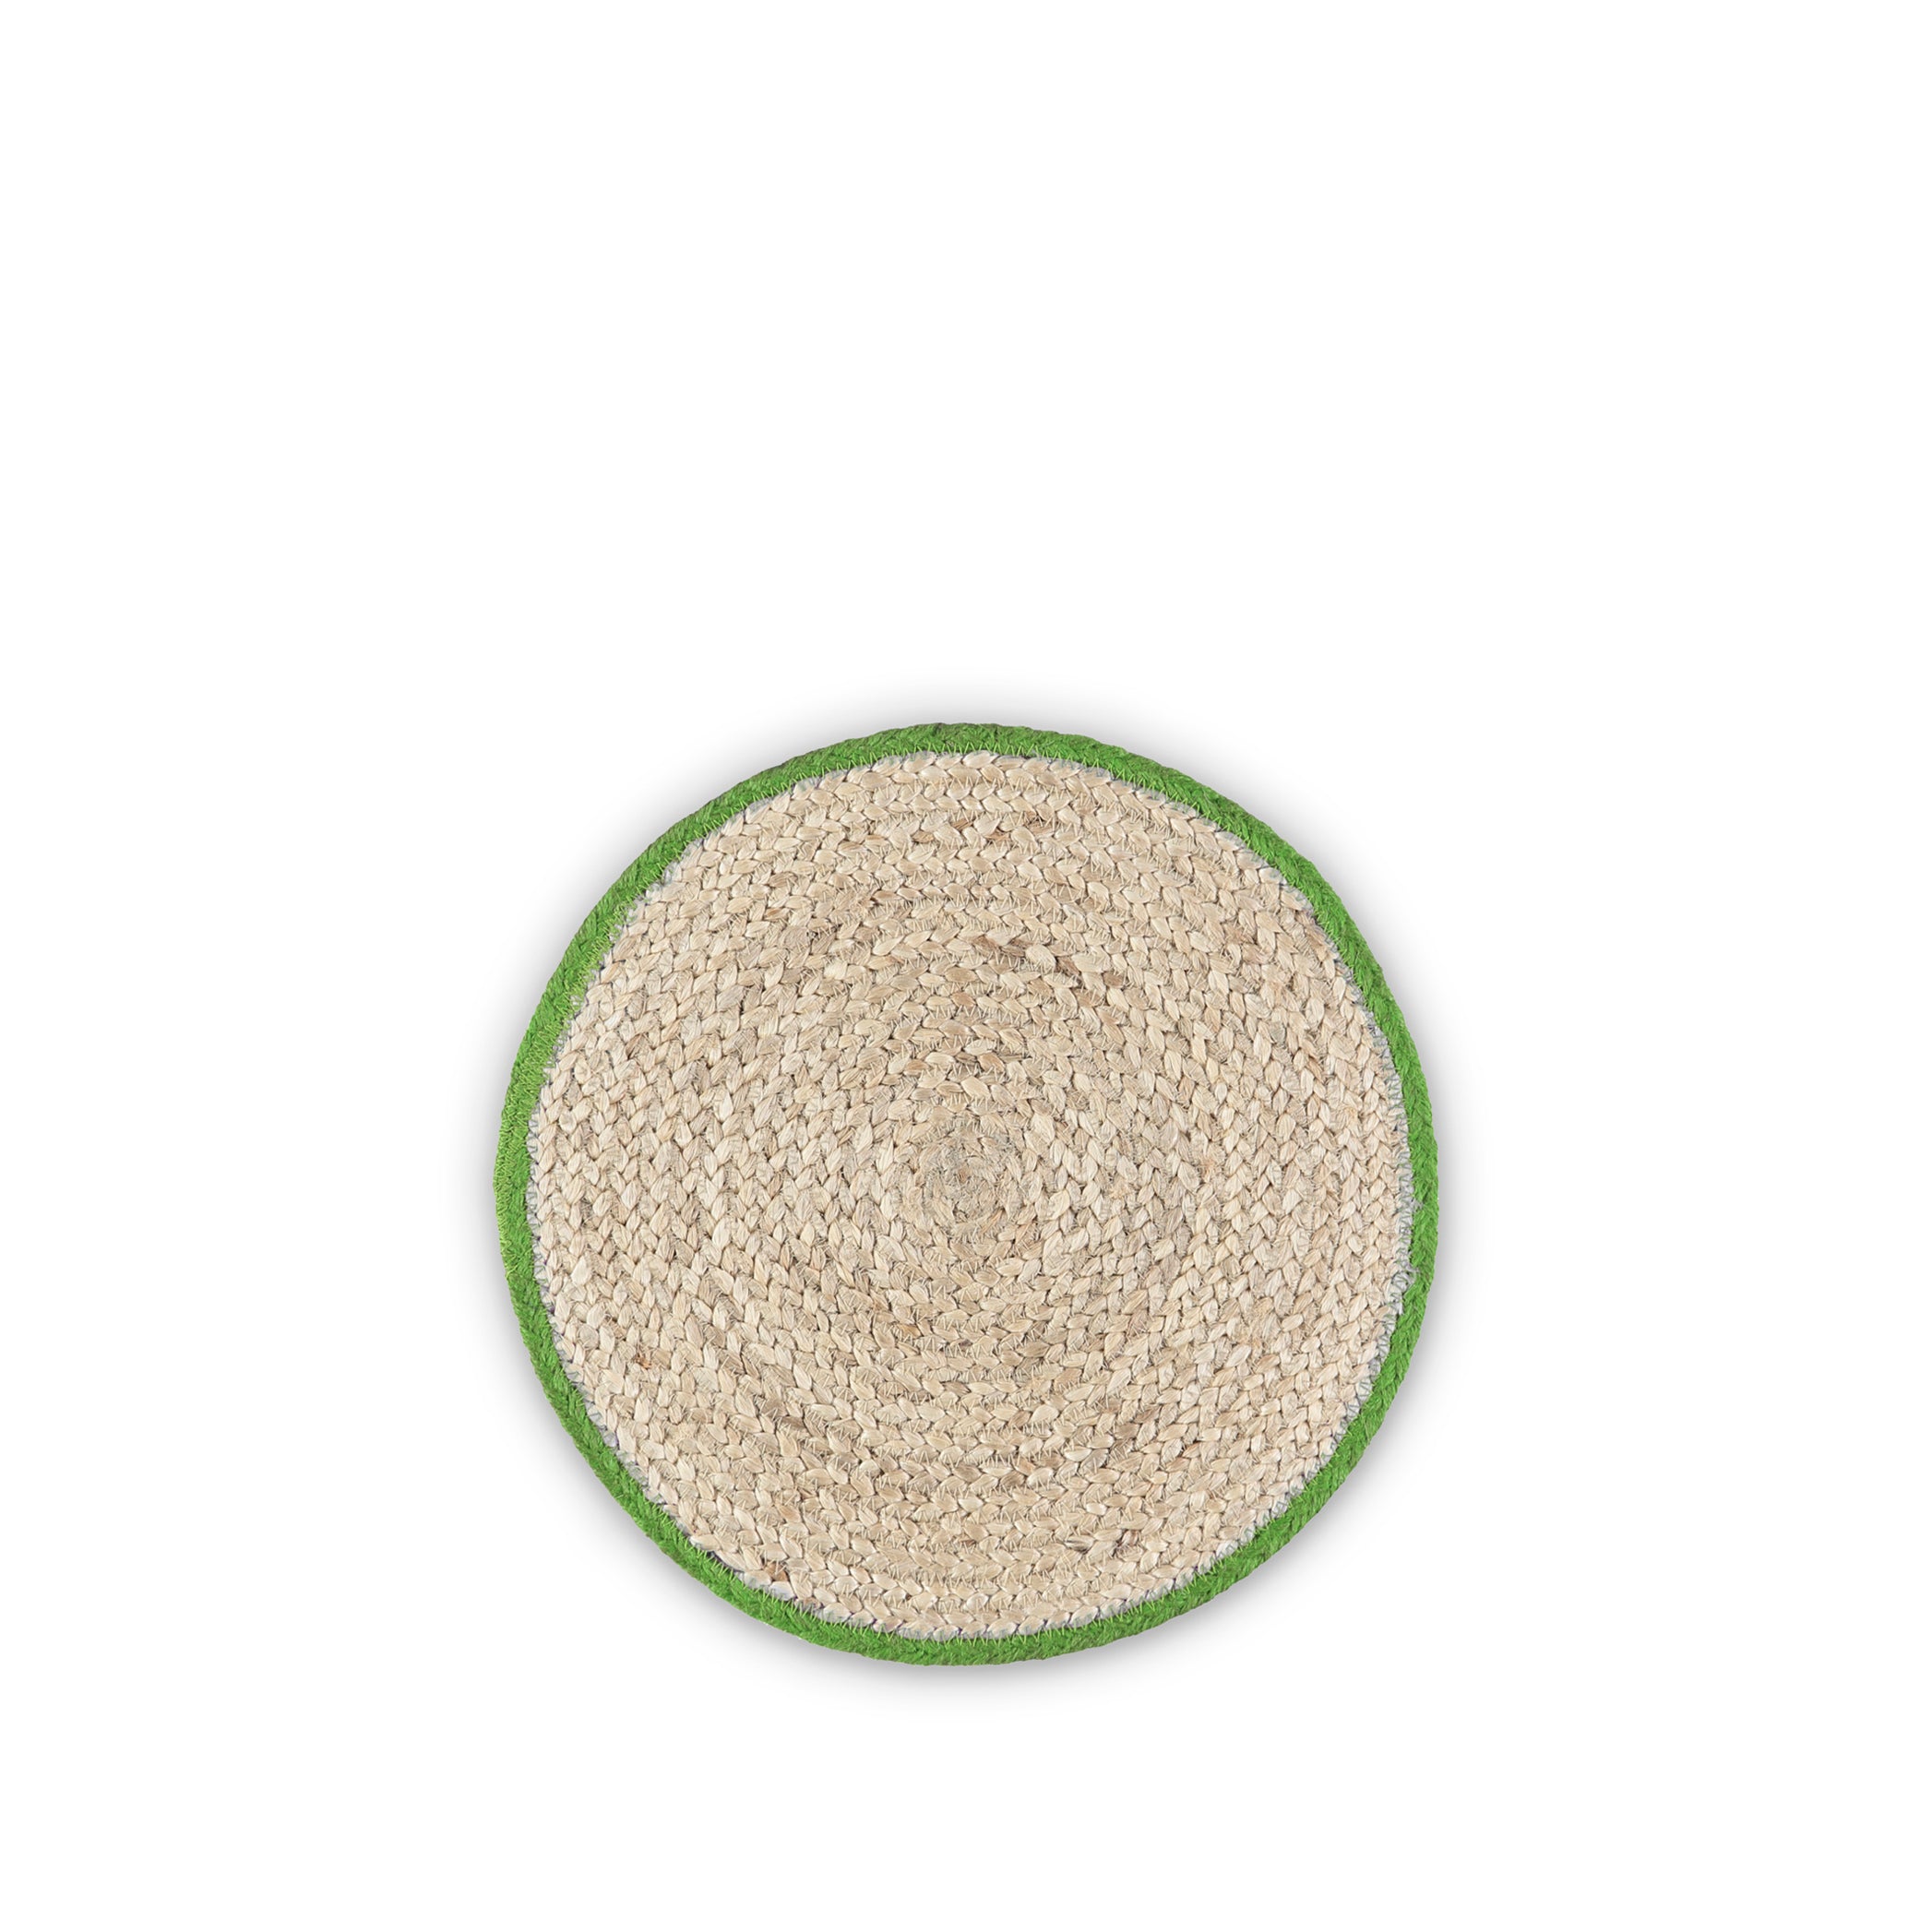 Jute Placemats with Green Border in Basket, Set of Six